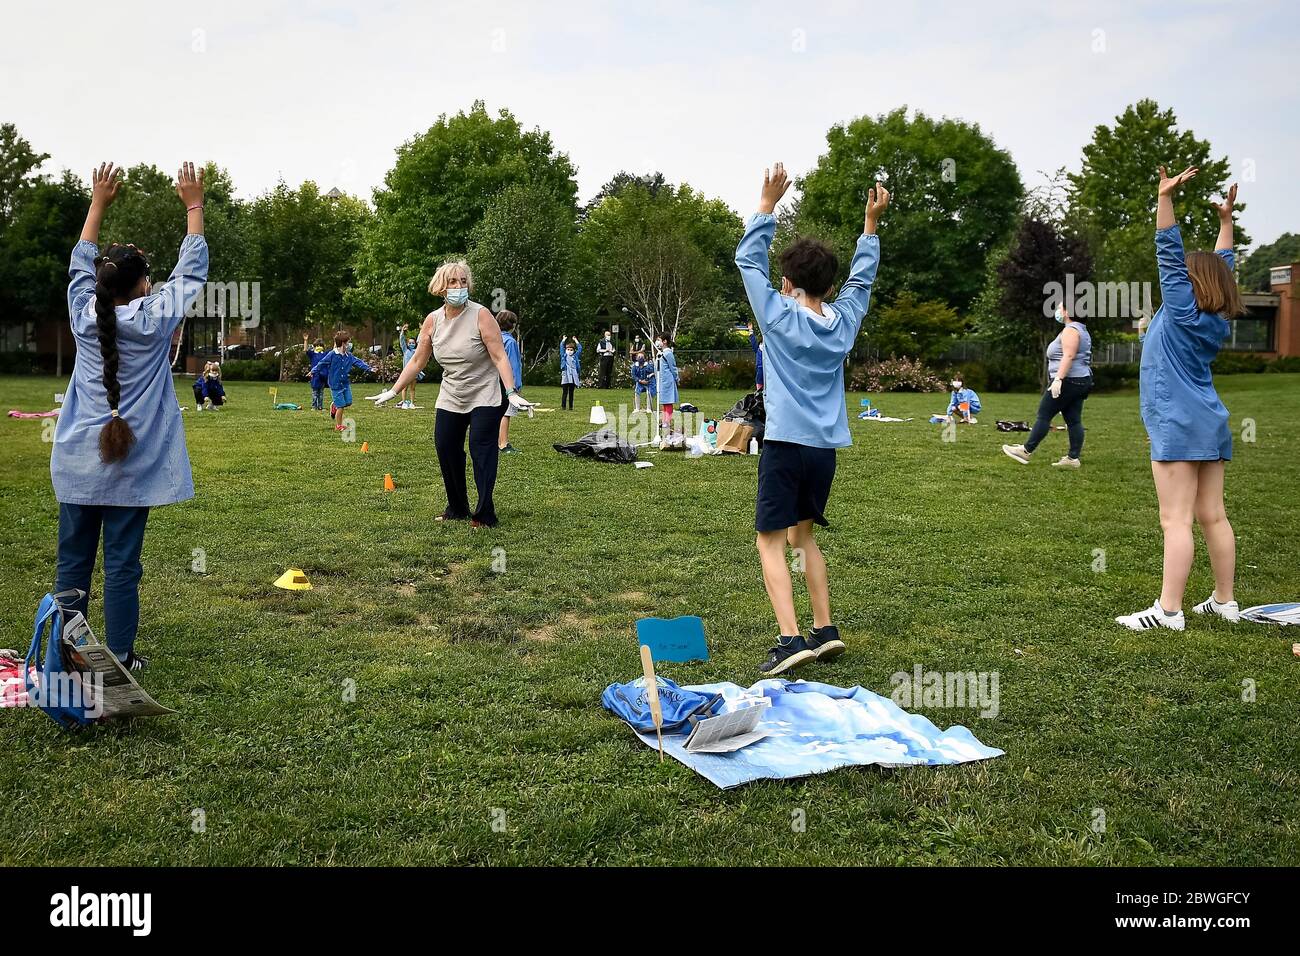 Turin, Italy - 01 June, 2020: Teachers and pupils play during the 'Noi ci siamo' event organized by an elementary school class to allow children to say goodbye on the last day of school respecting the rules to contain COVID-19 coronavirus outbreak. The Italian government has not yet decided on the reopening date of the schools after the COVID-19 coronavirus emergency. Credit: Nicolò Campo/Alamy Live News Stock Photo